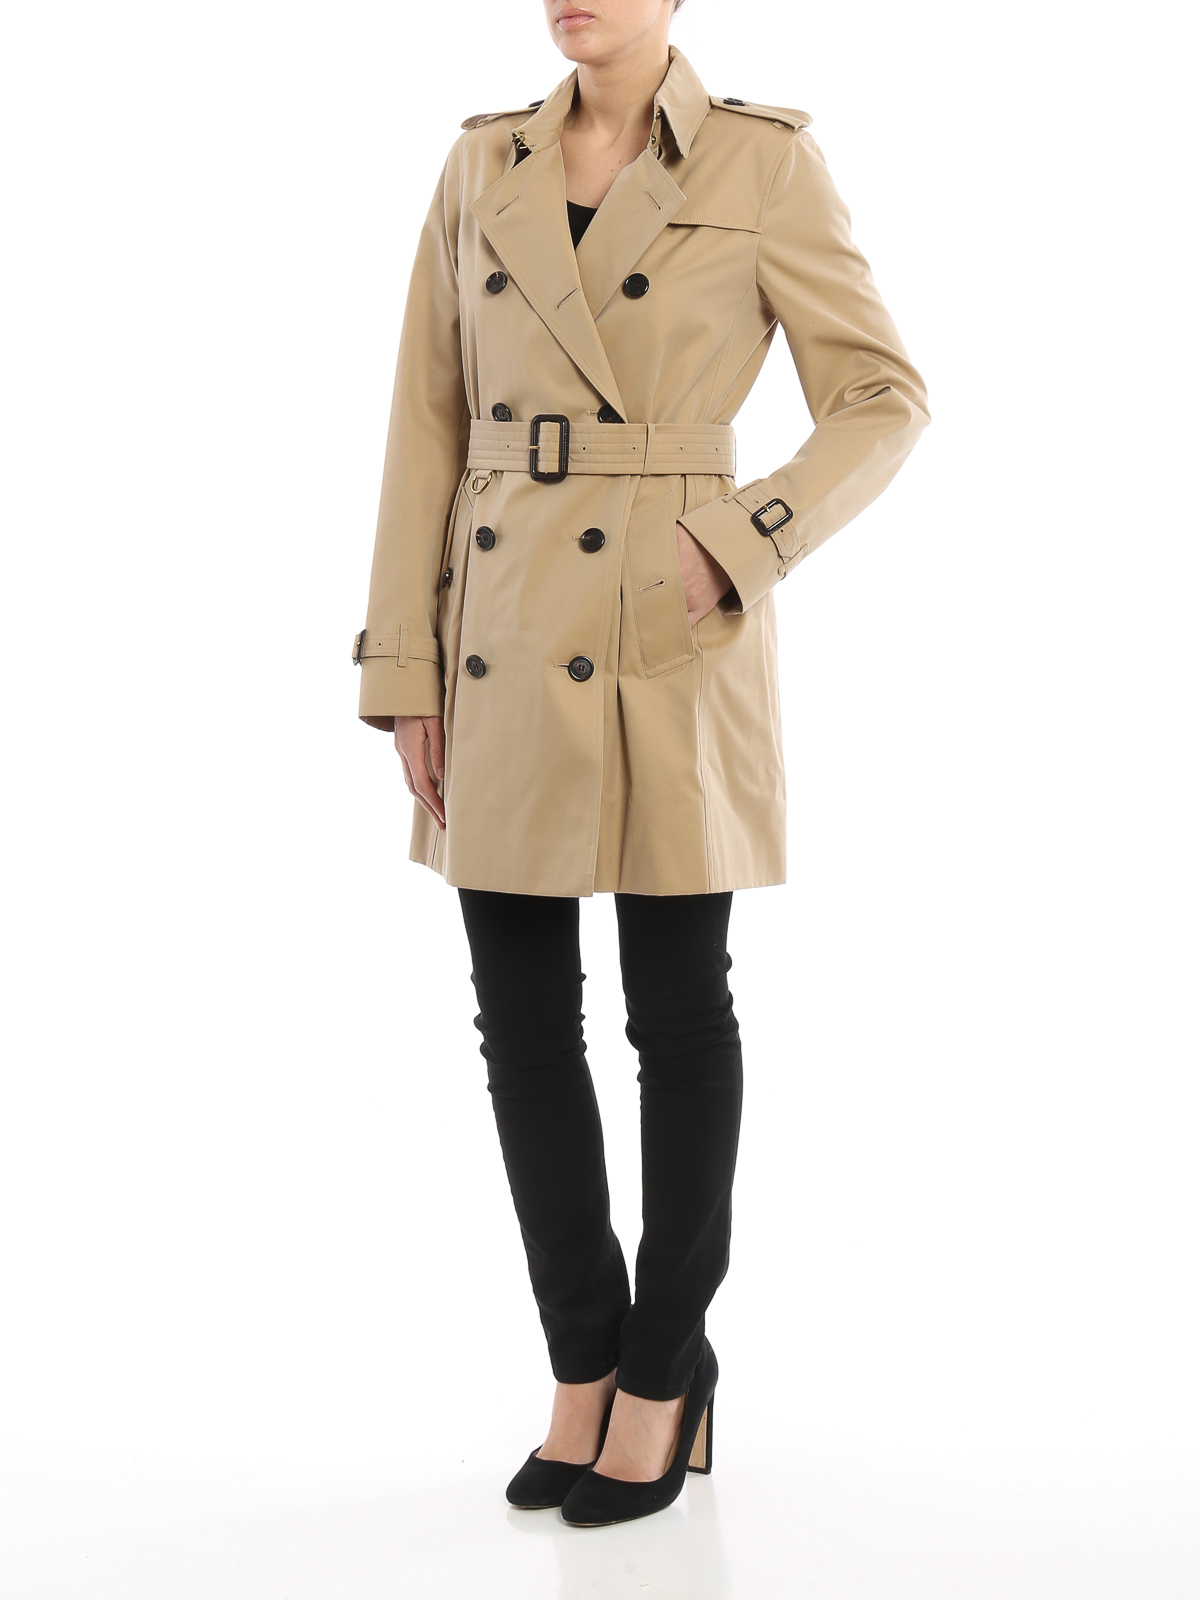 Occurrence avec le temps Populaire trench burberry kensignton femme ...